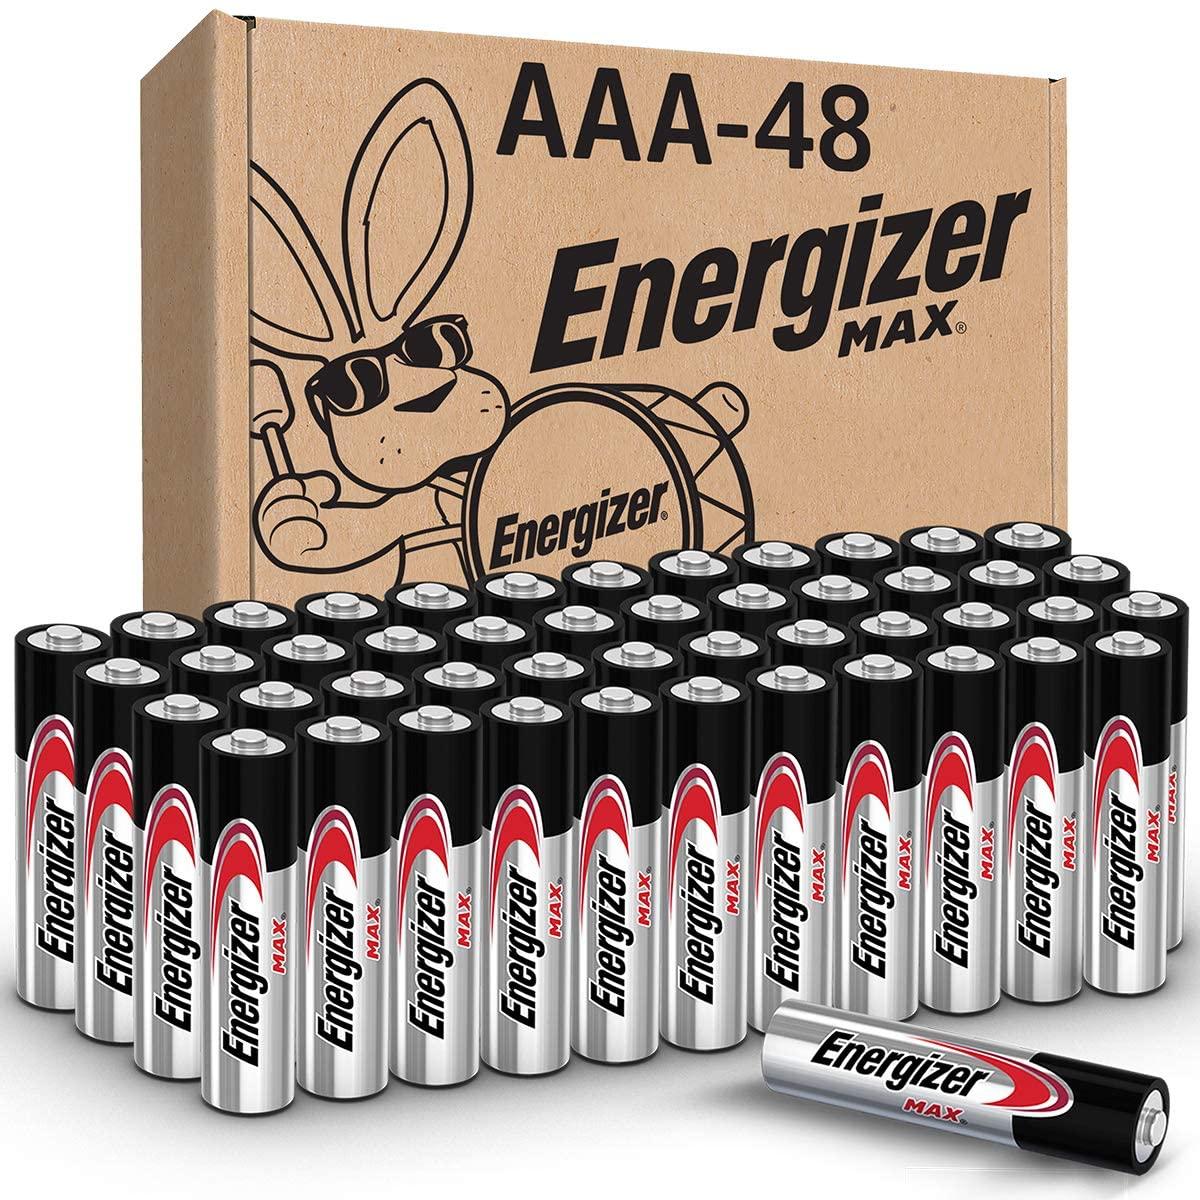 48x Energizer AAA Alkaline Batteries for $14.62 Shipped